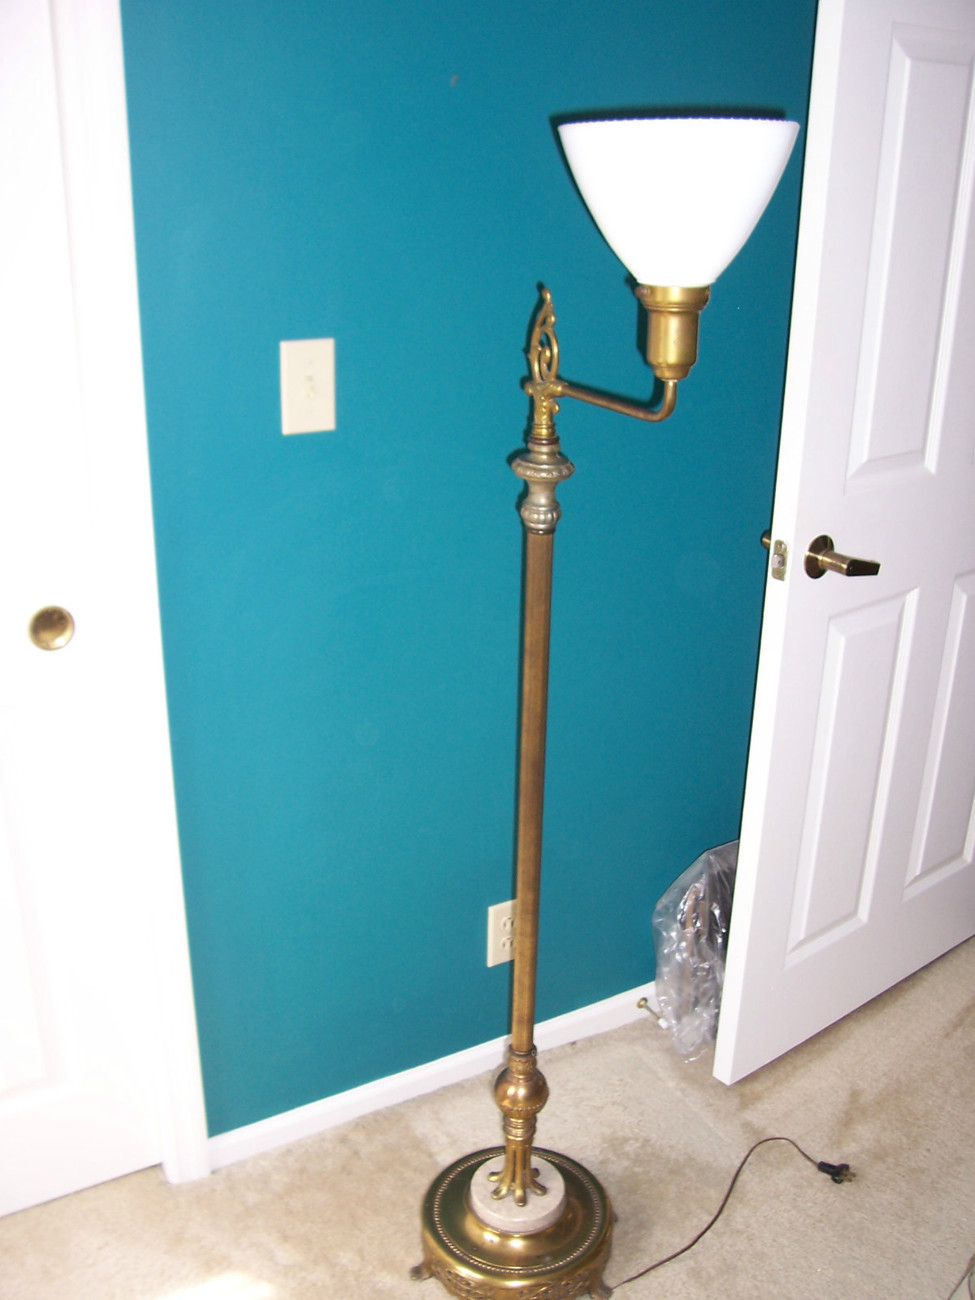 Antique Brass and Marble Base Floor Lamp with Decorative Finial - Floor